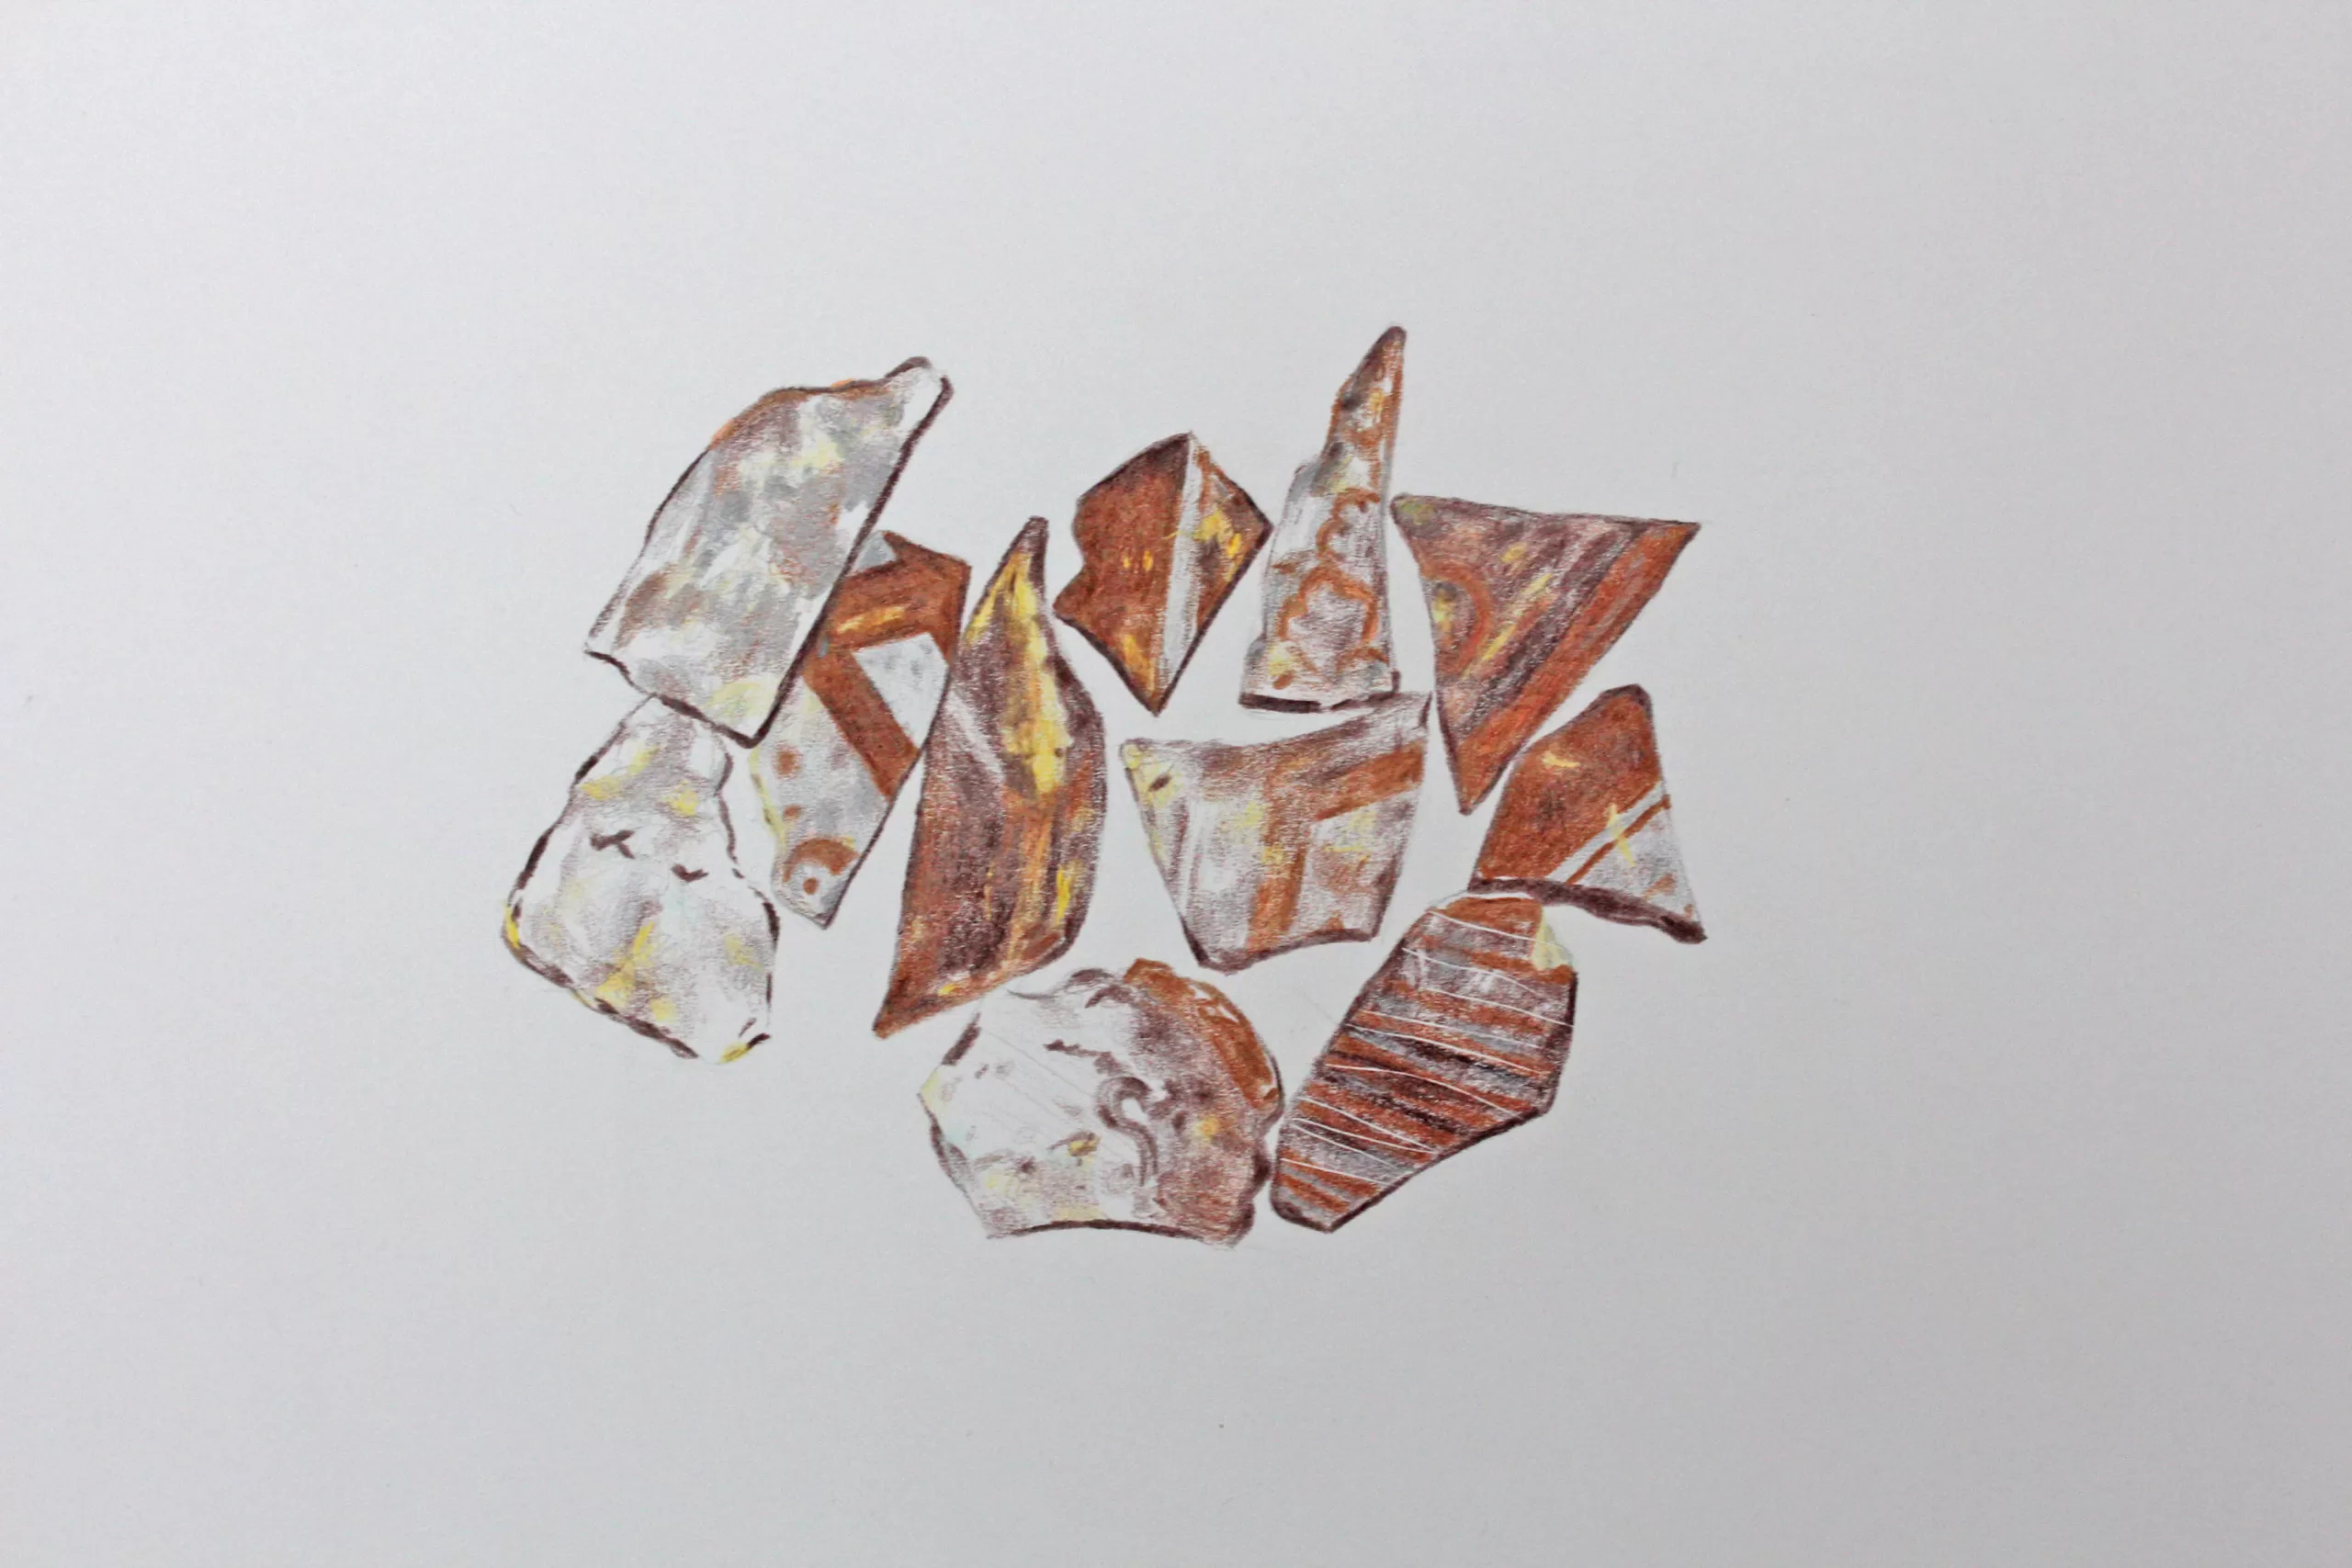 Fragment Group coloured pencil drawing by Abi Spendlove